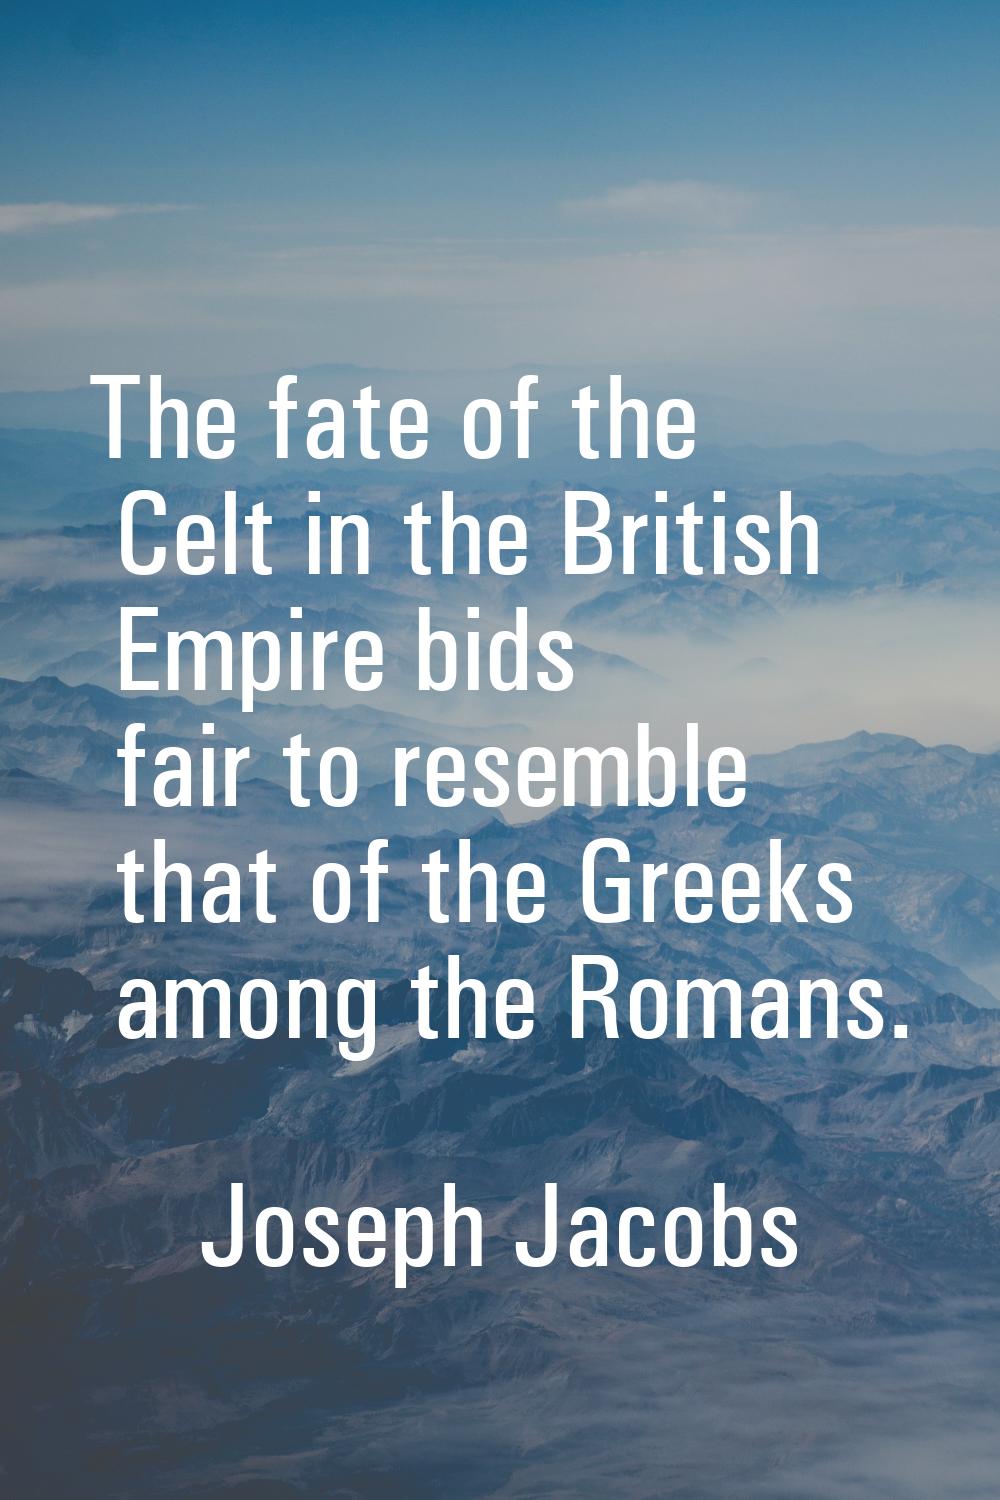 The fate of the Celt in the British Empire bids fair to resemble that of the Greeks among the Roman